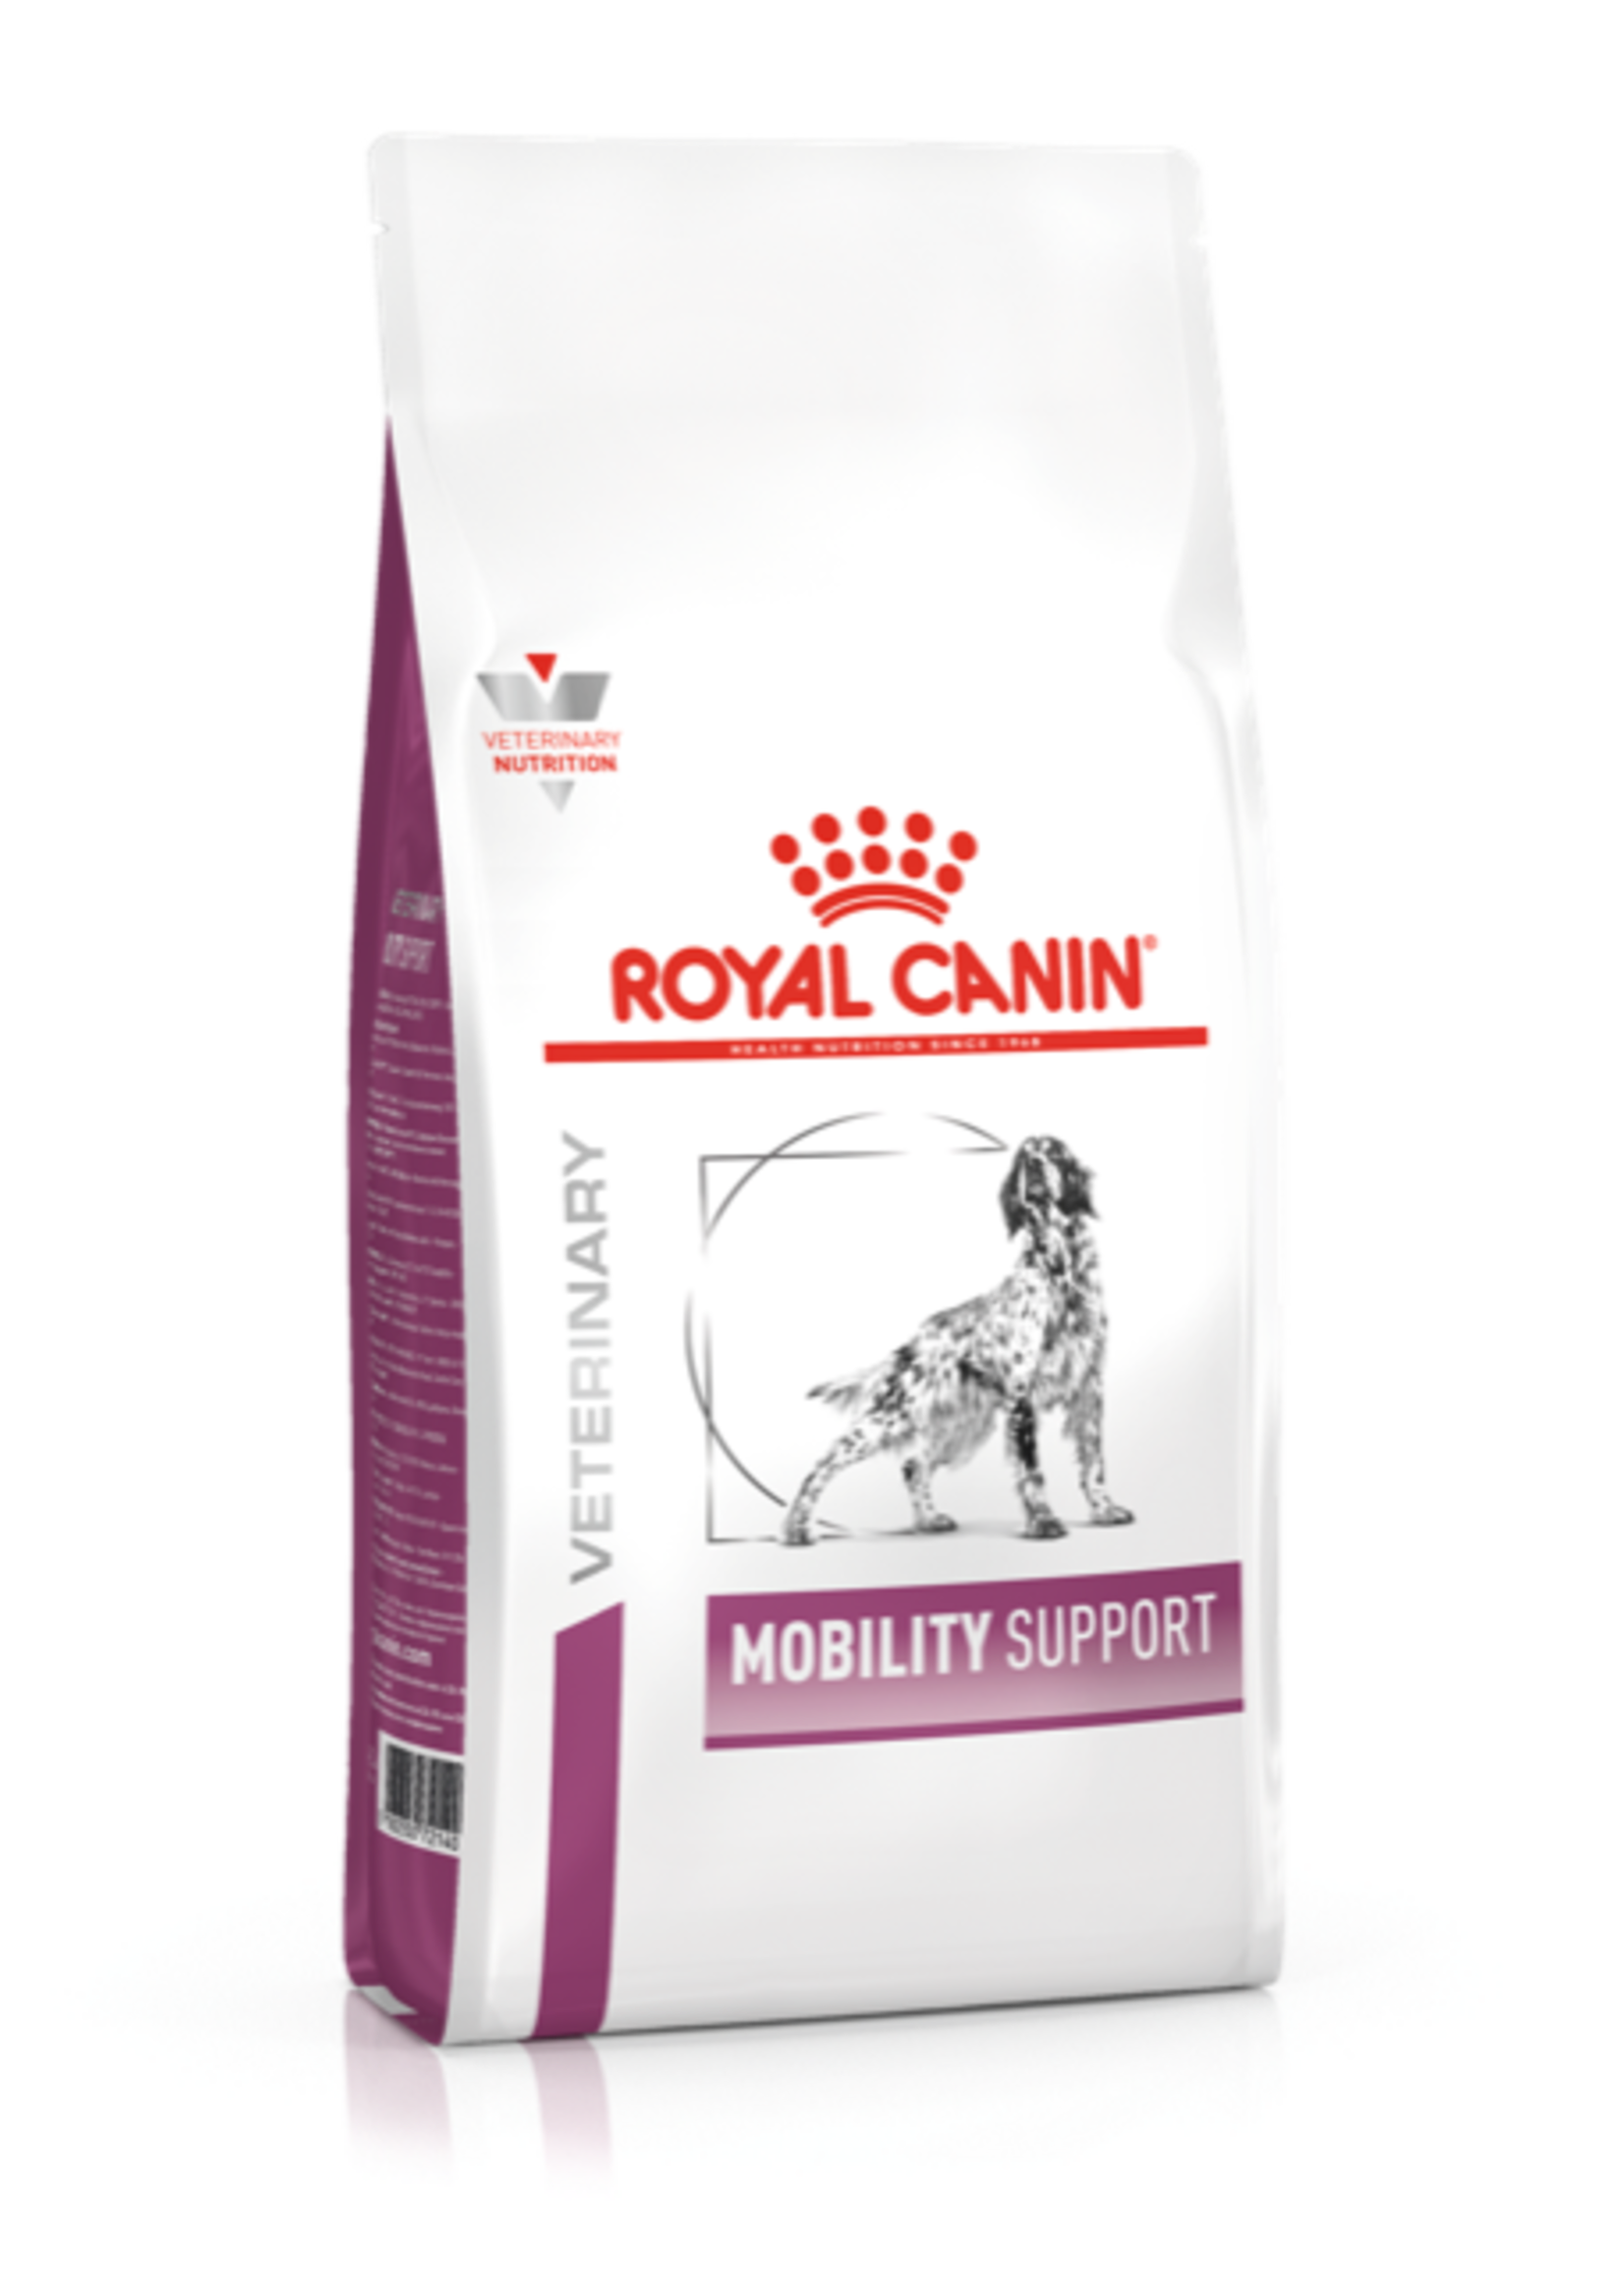 Royal Canin Royal Canin Vdiet Hund Mobility Support 2kg